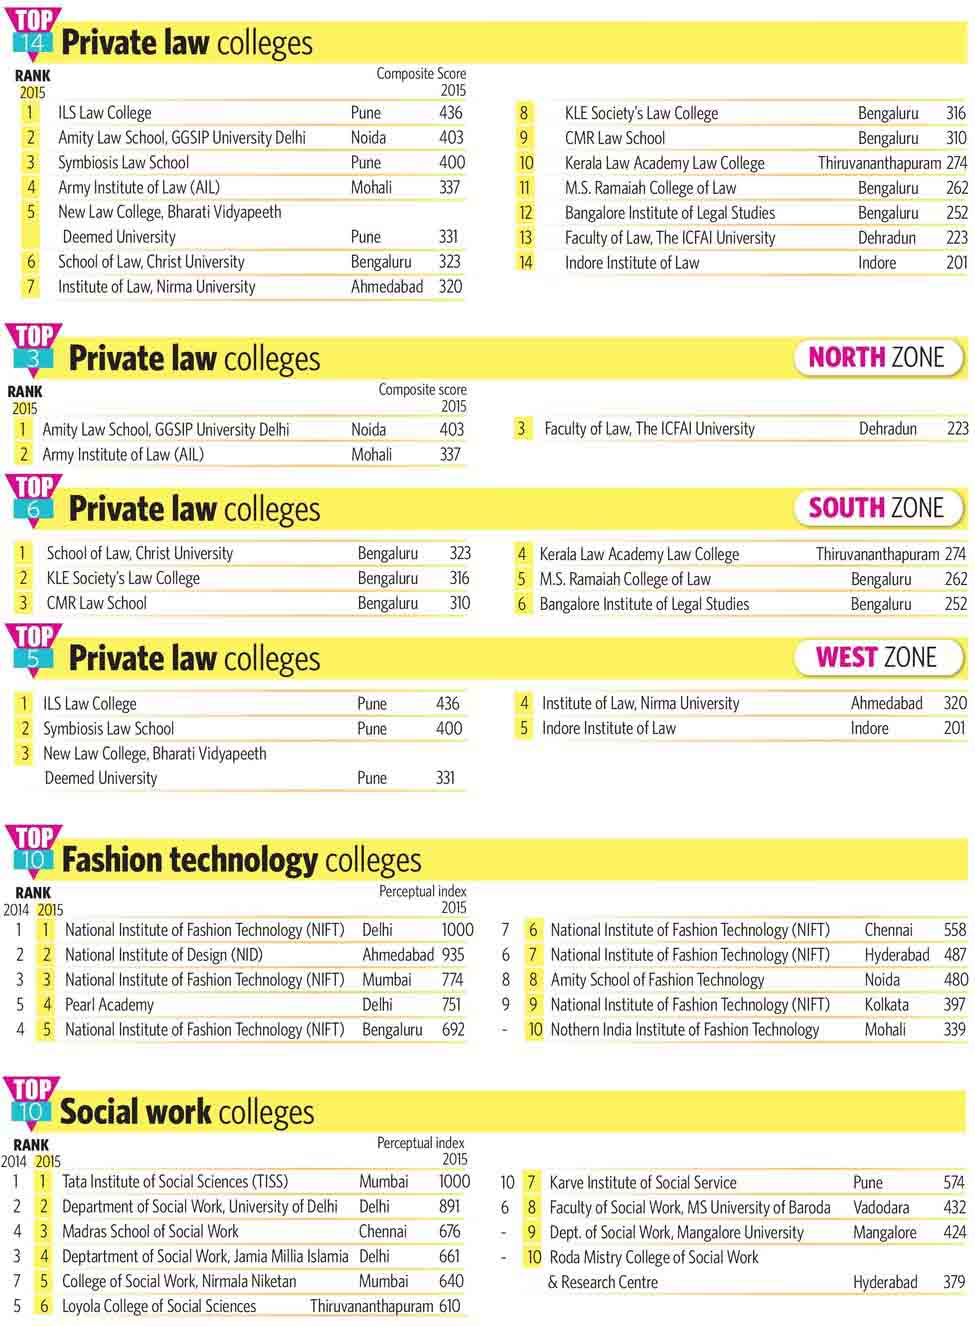 86-Private-law-colleges